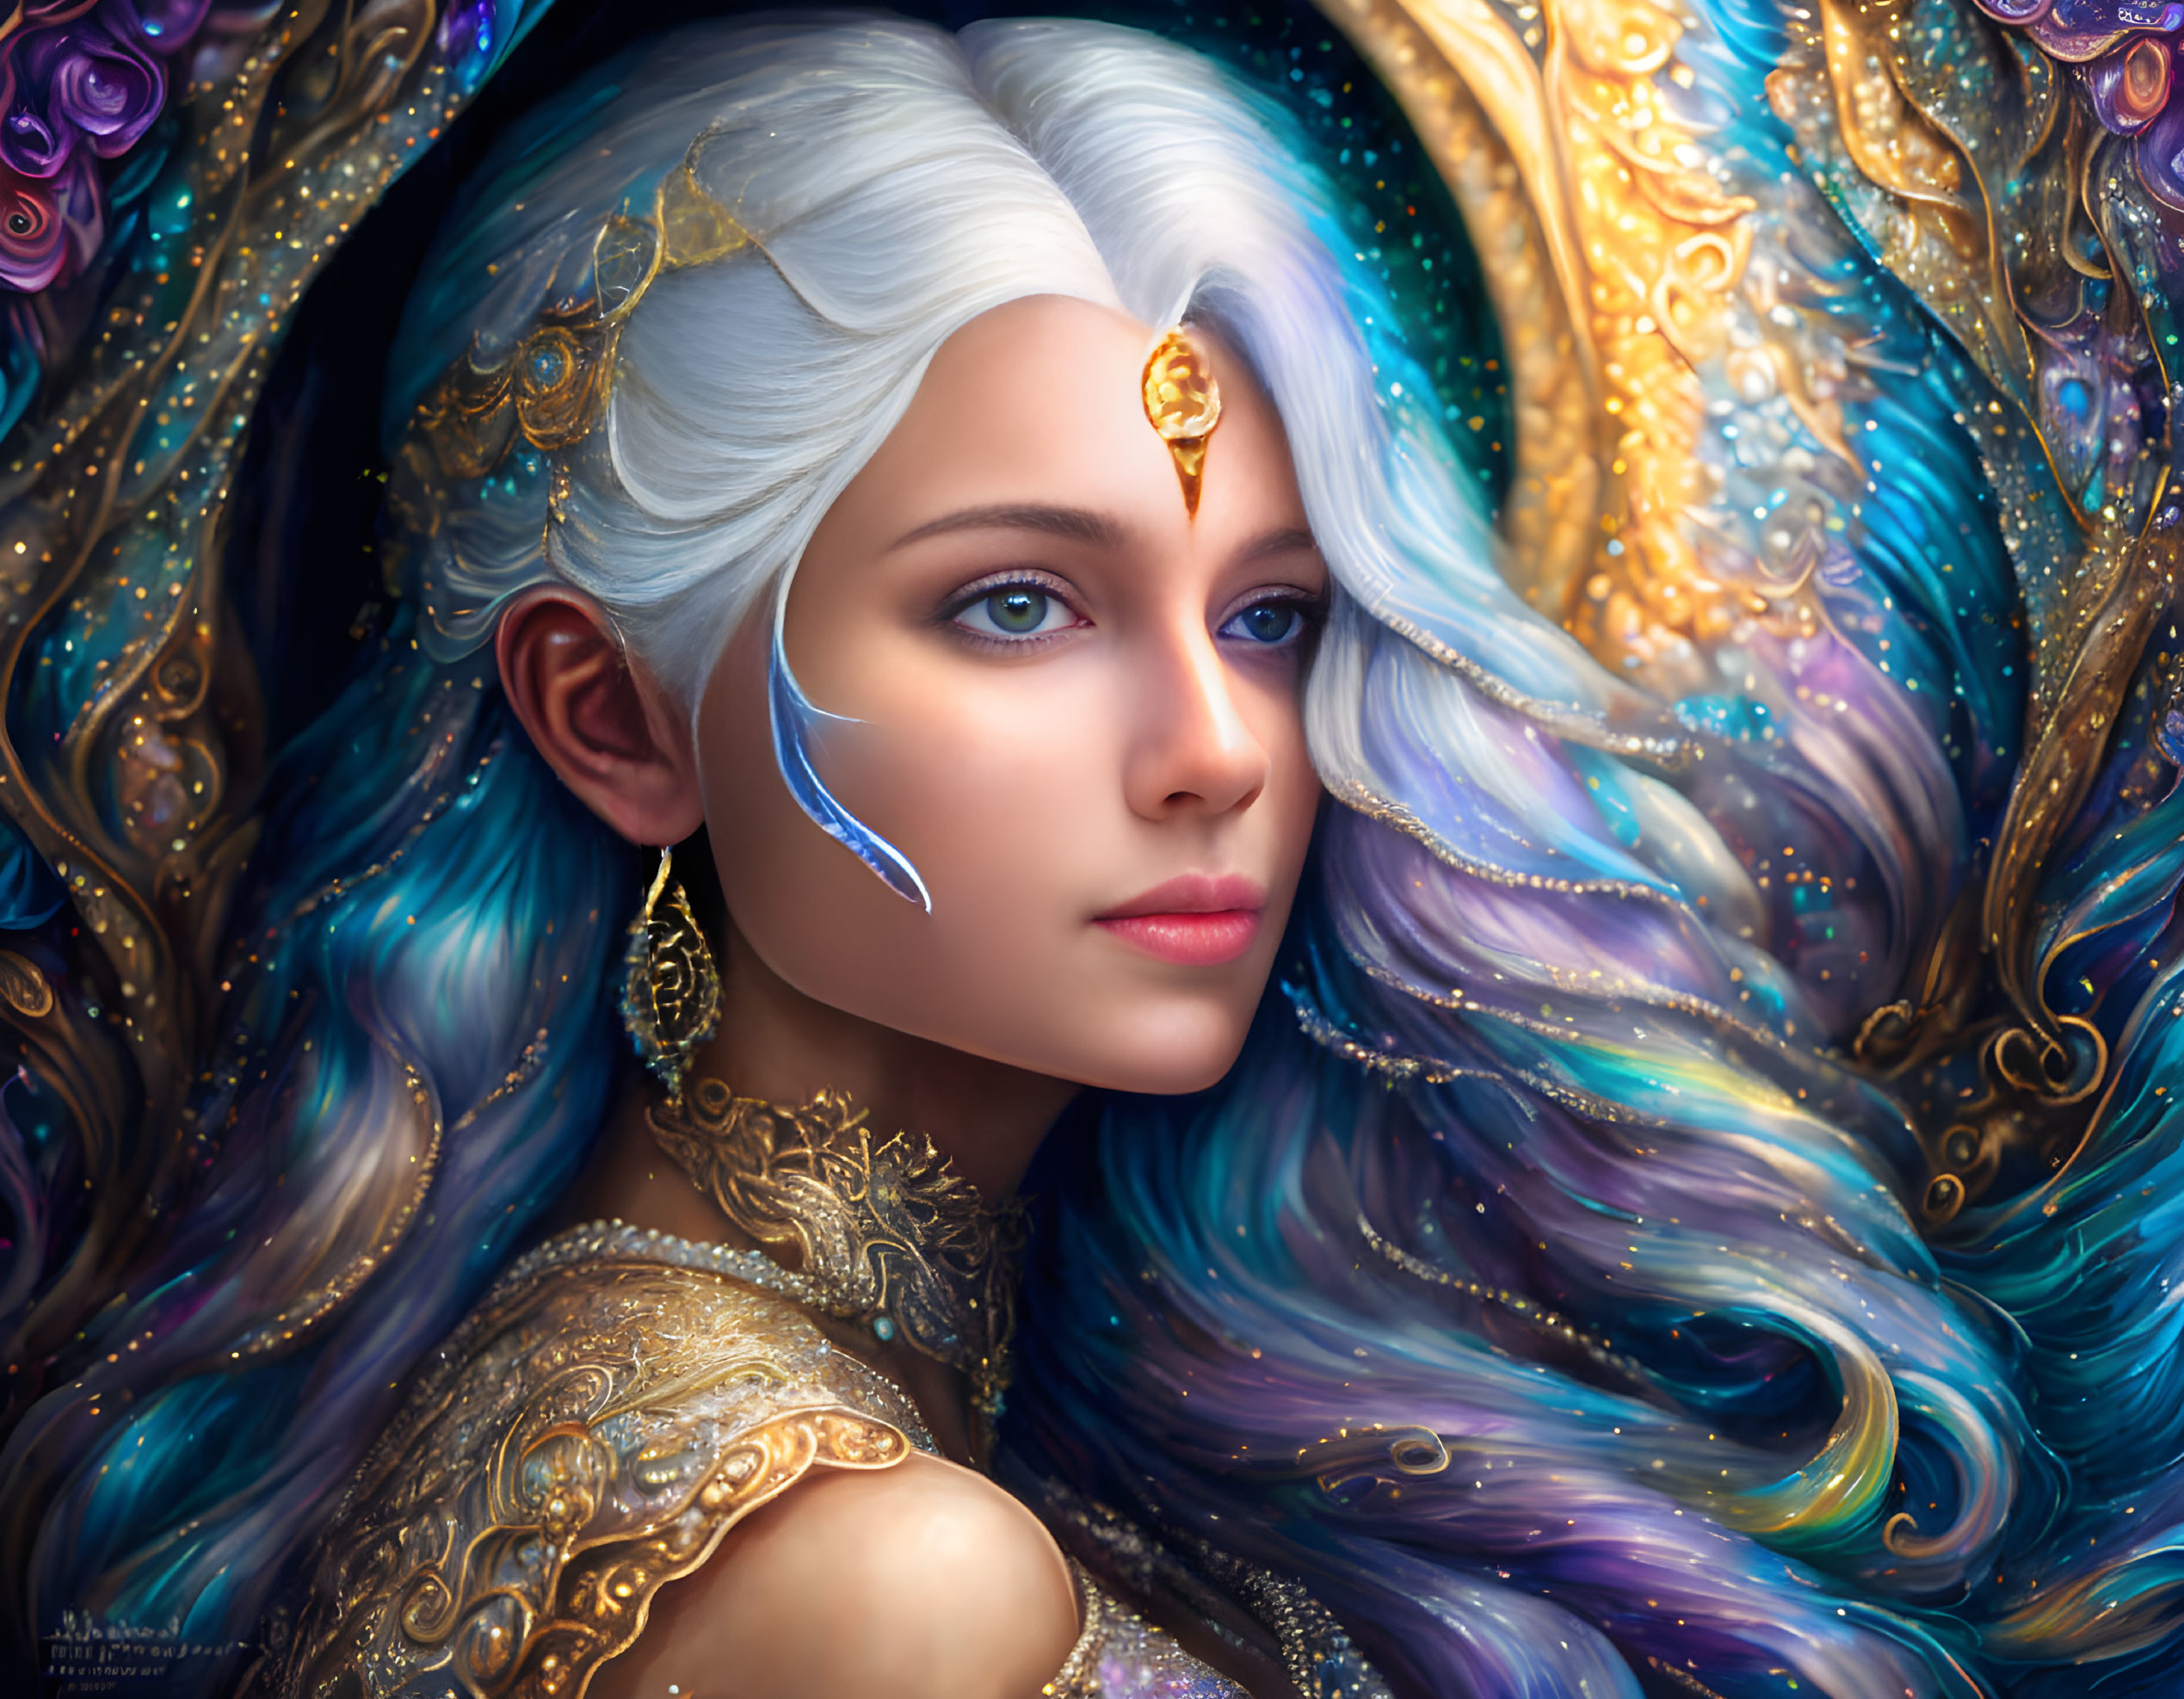 Fantasy portrait: Woman with white hair, gold headpiece, jewel-toned backdrop